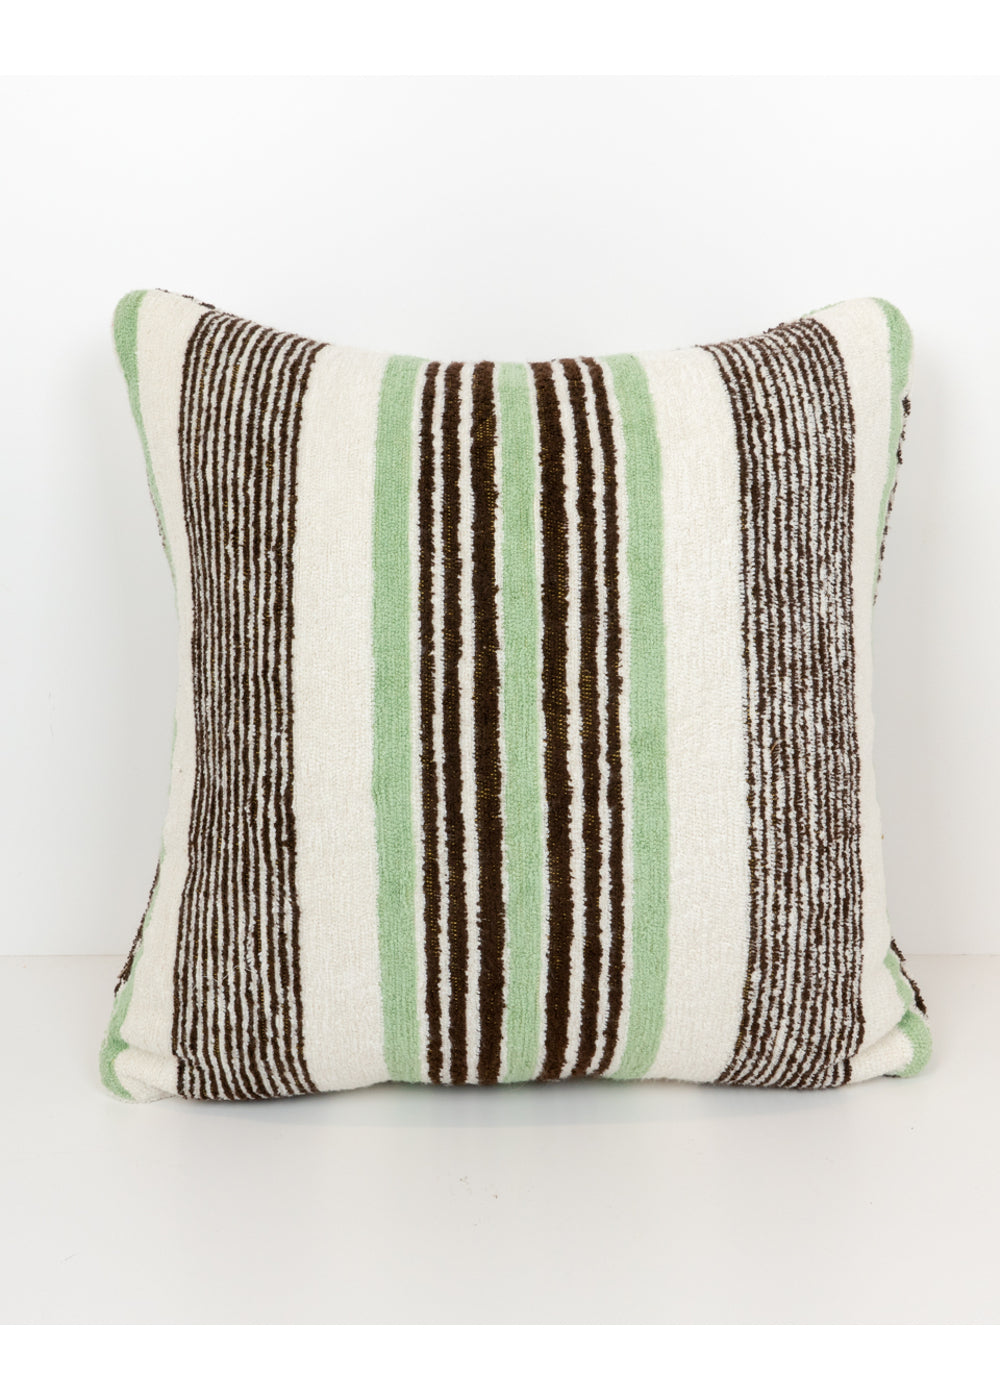 outdoor-friendly terrycloth pillow with black, white, and green stripe